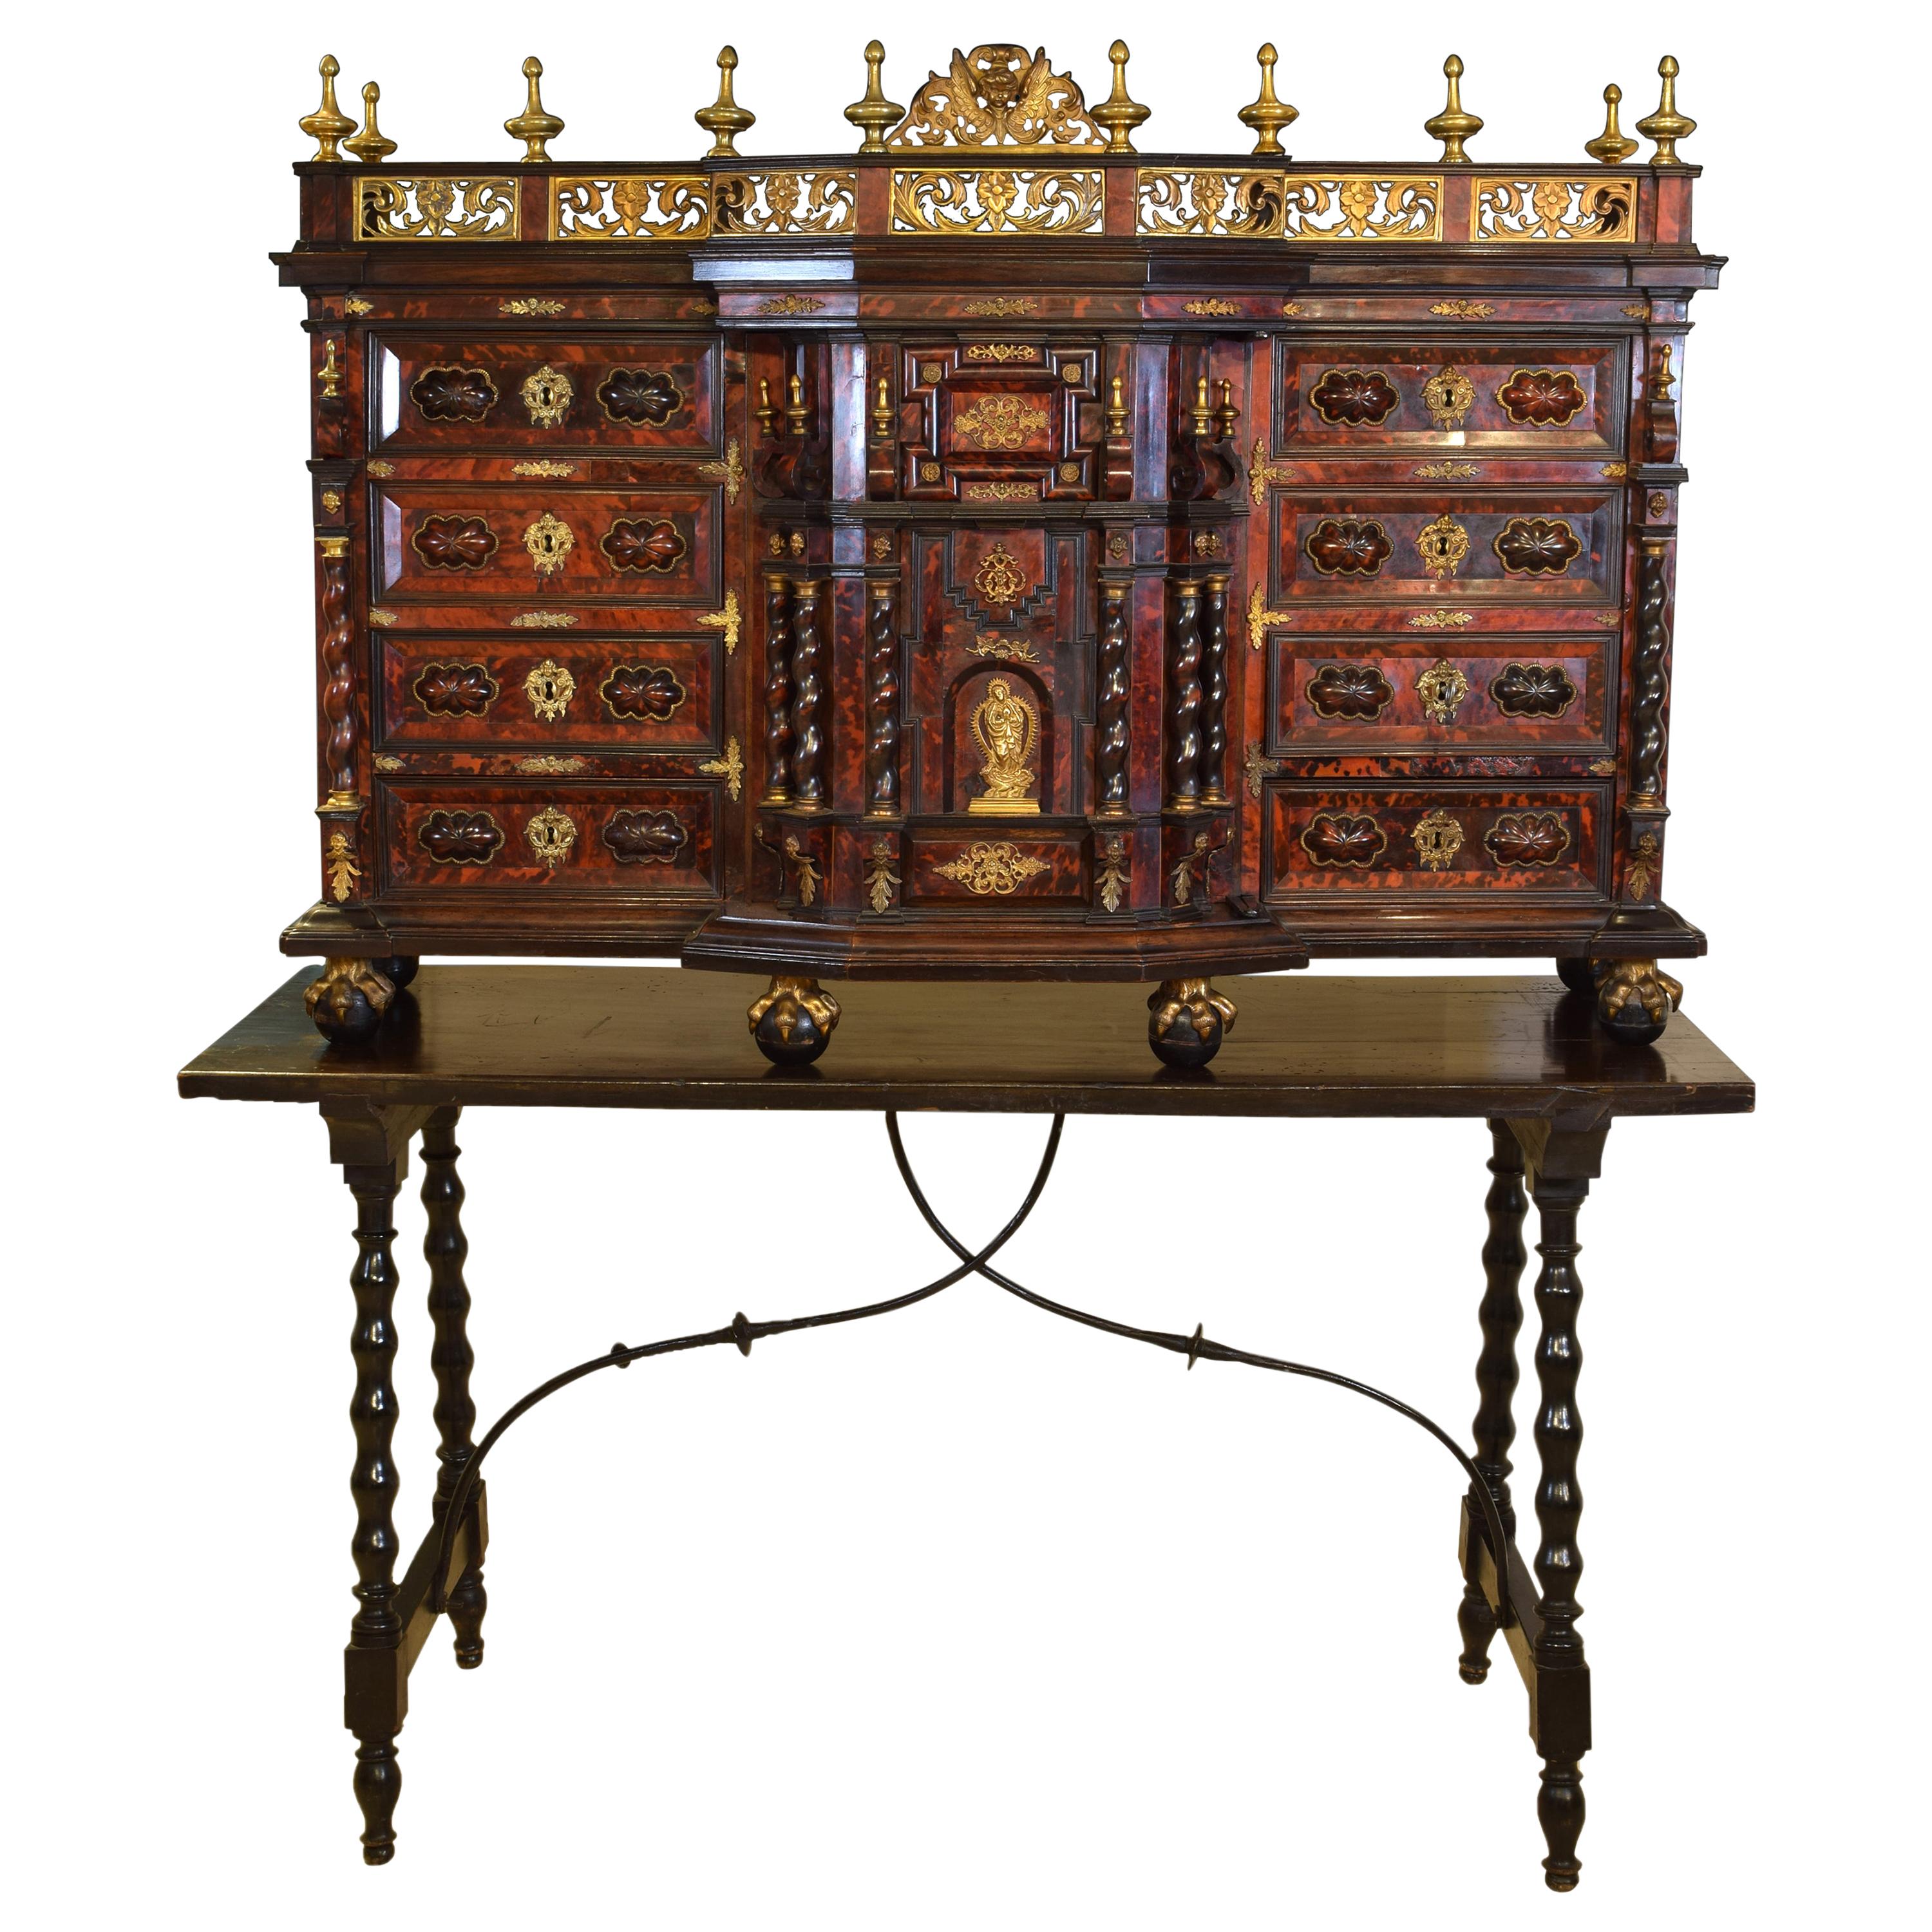 Cabinet with Table, Tortoiseshell, Bronze, Etc, Italy, 17th Century and Later